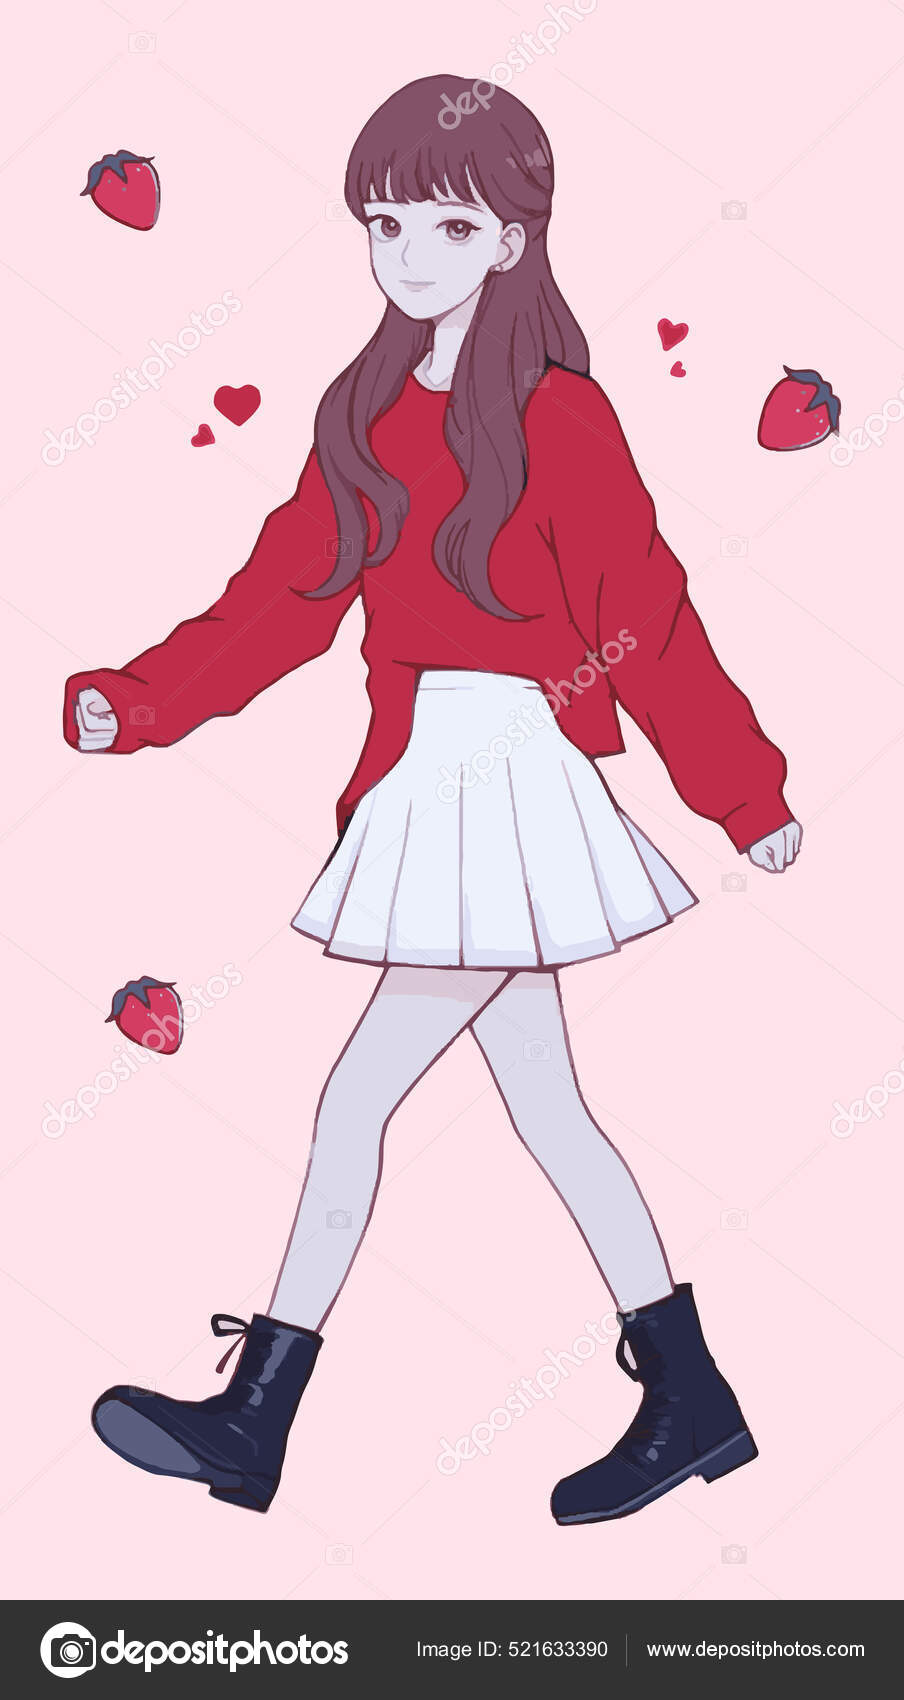 Cute anime girl with bow on her hair Royalty Free Vector